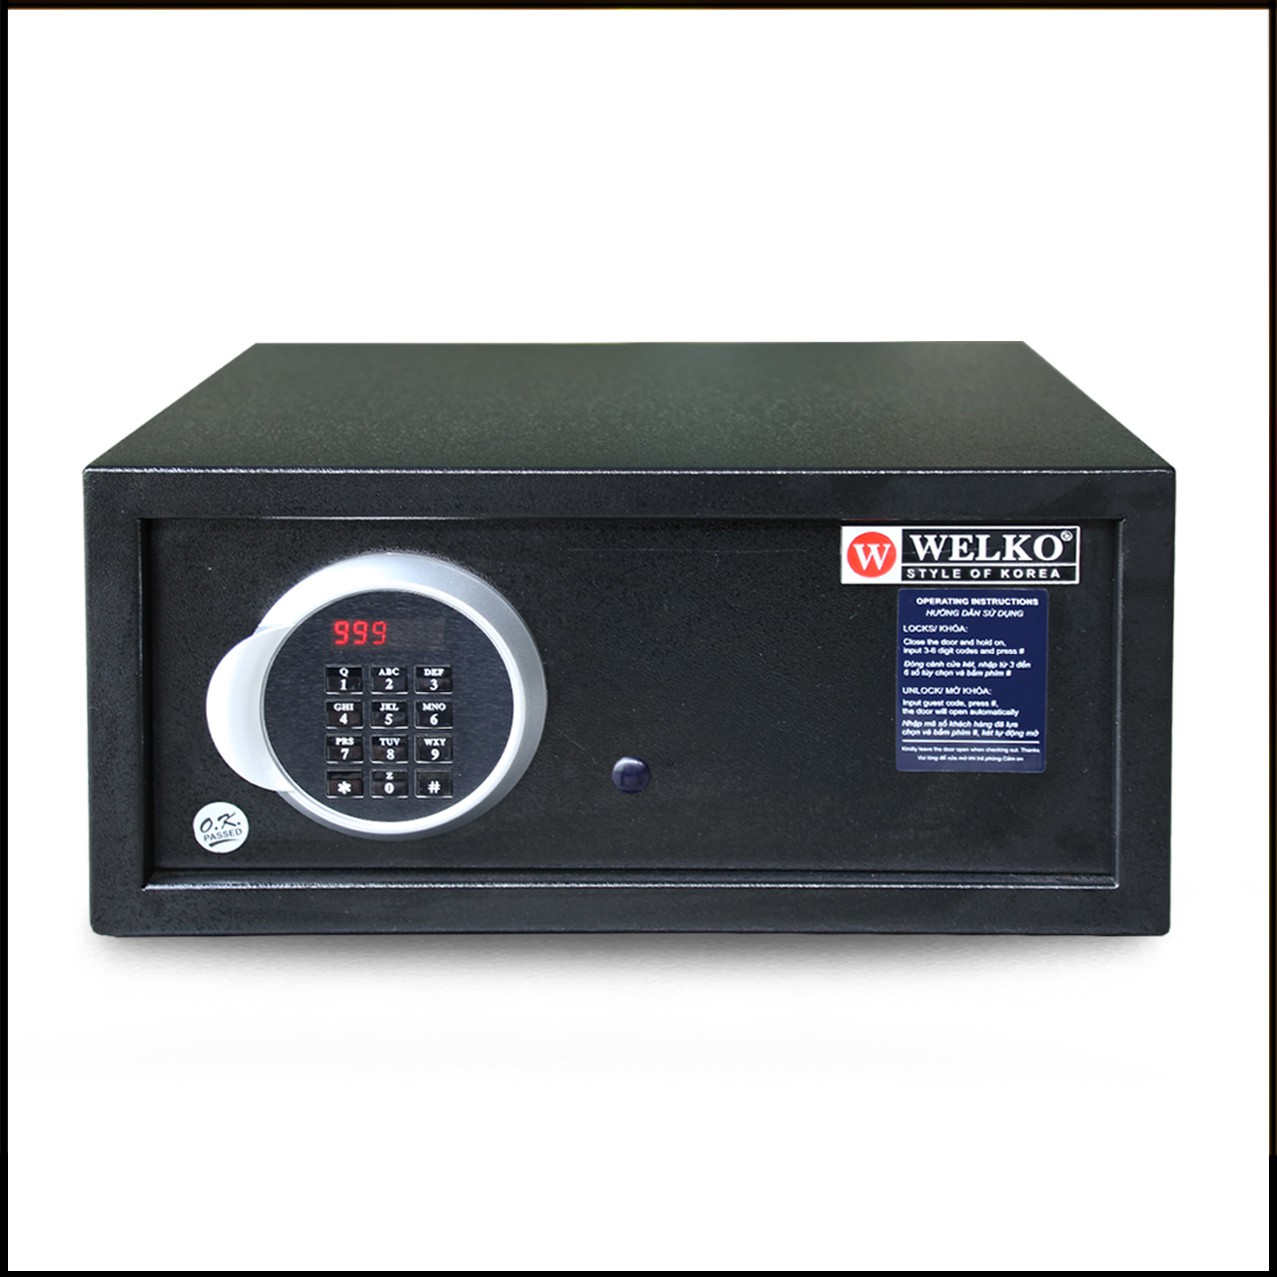 Hotel Safe Brands Wholesale Suppliers